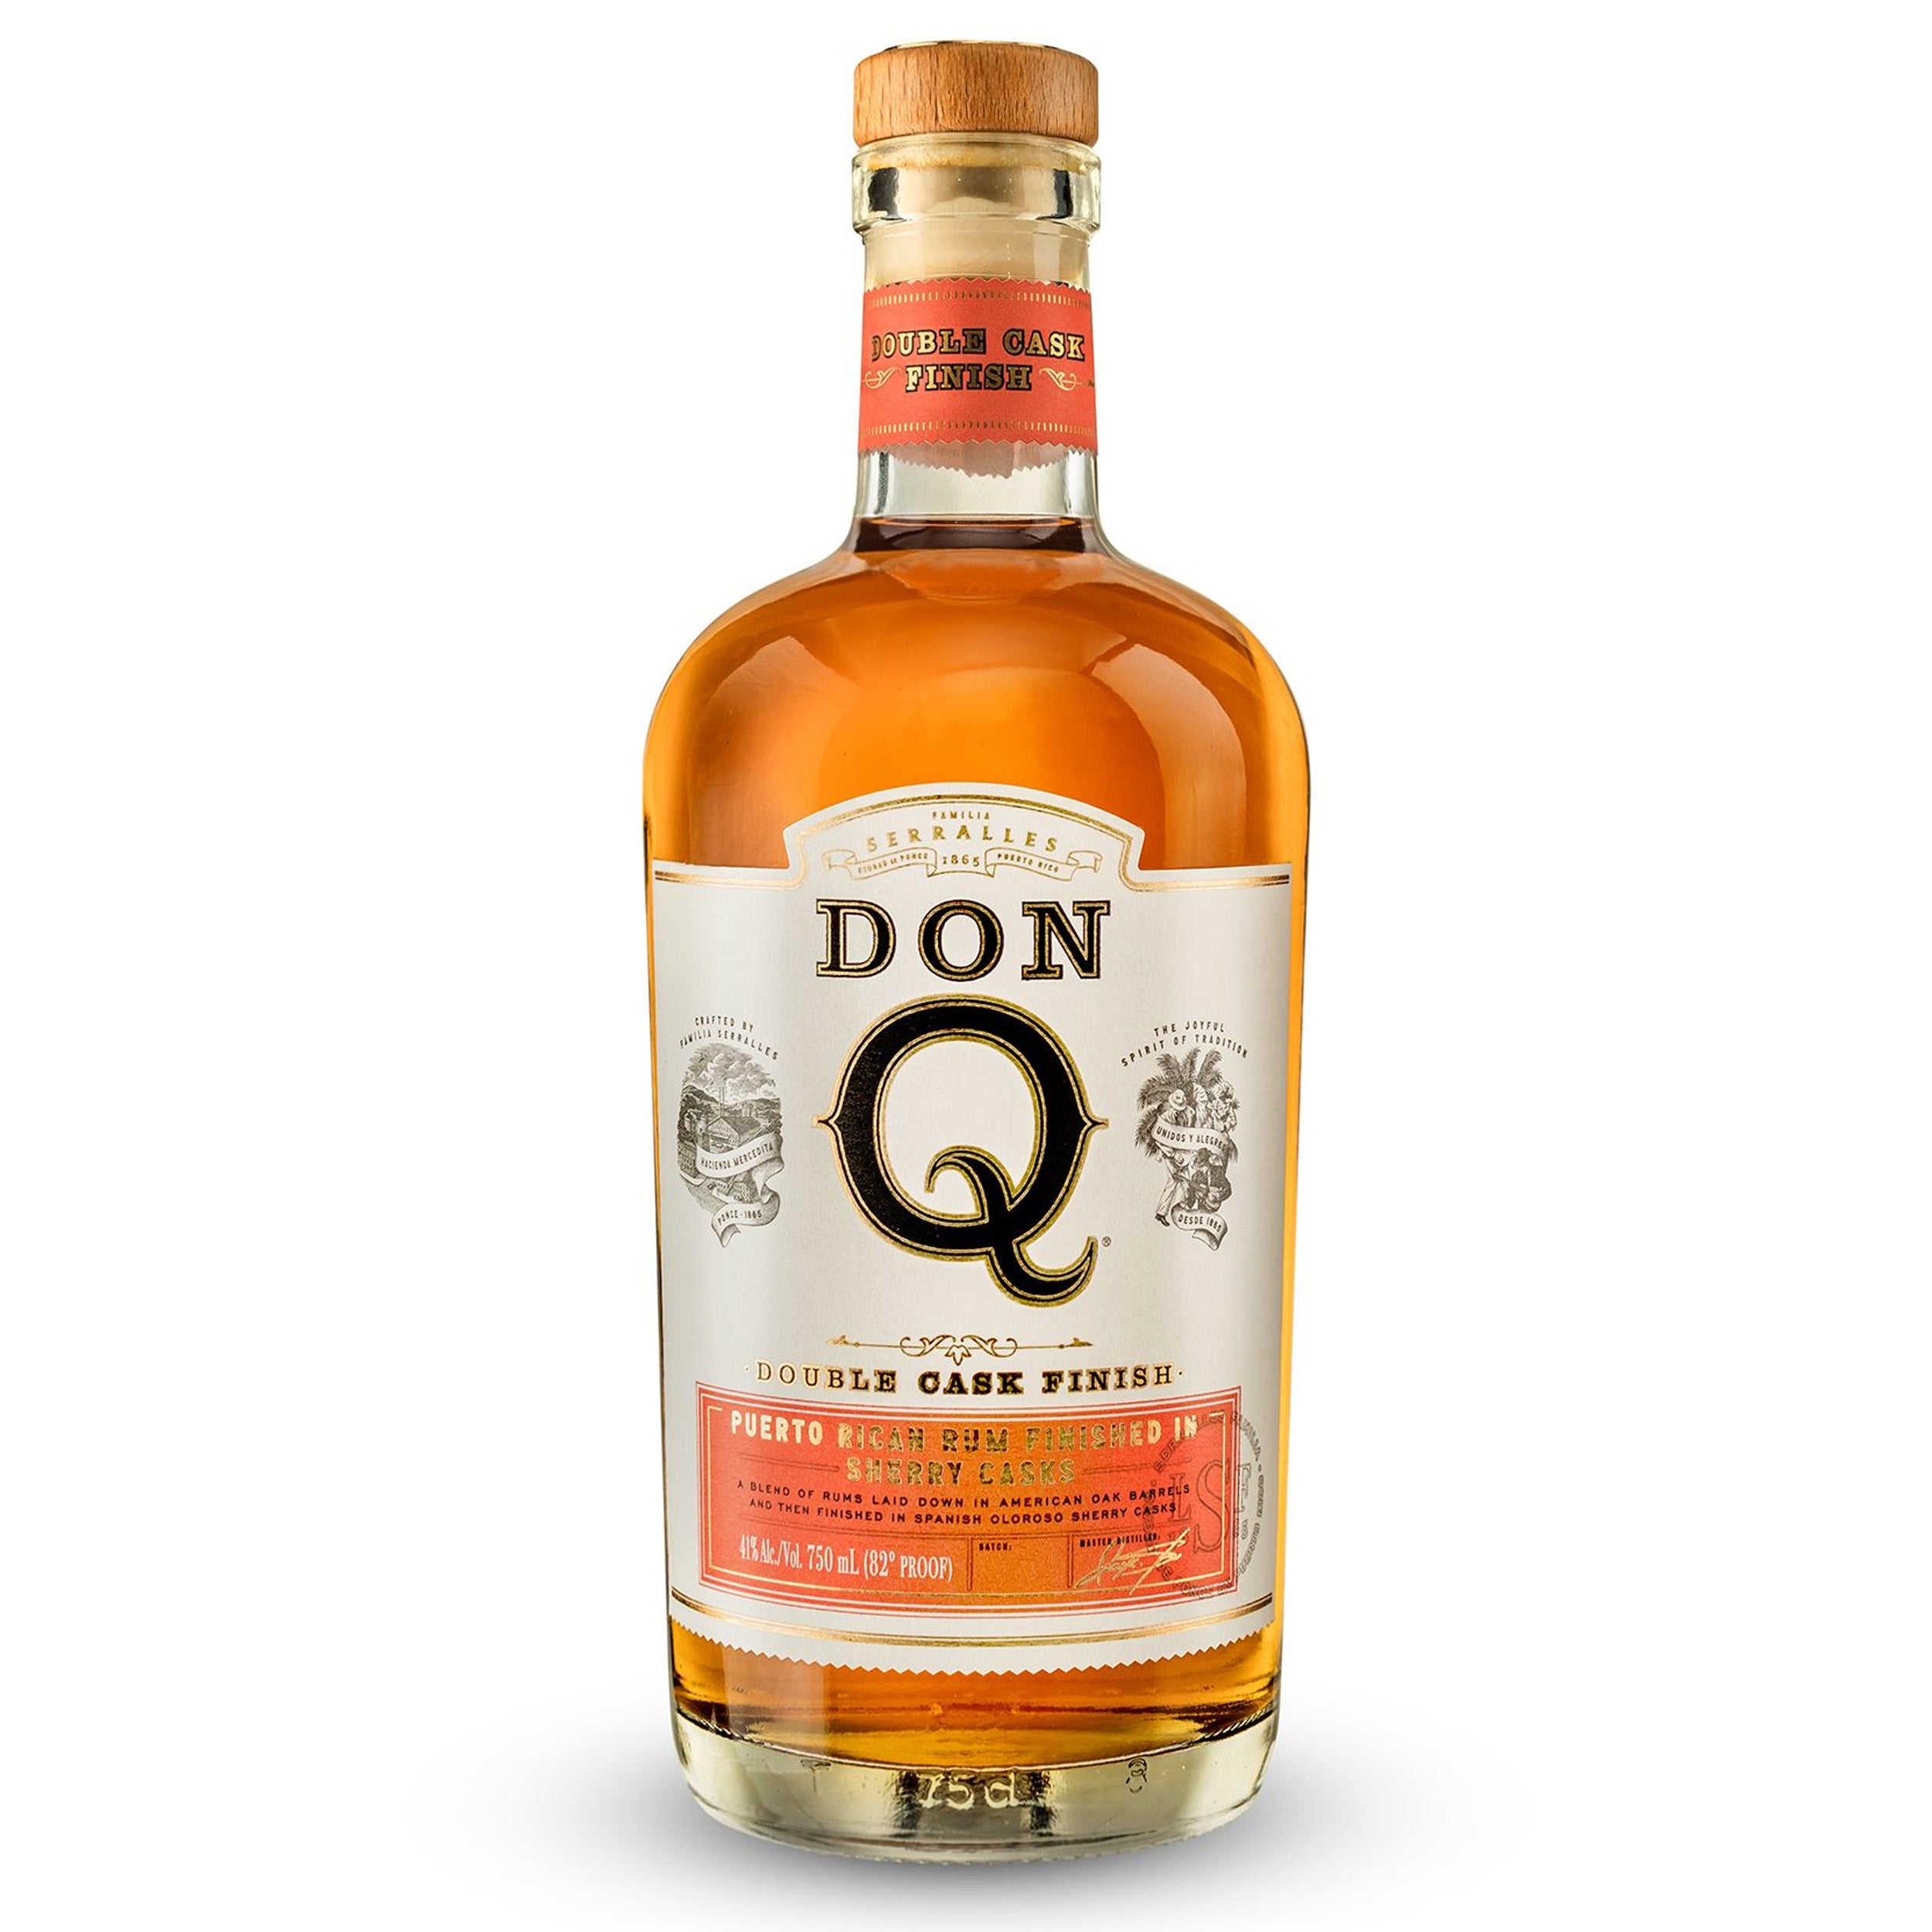 Don Q Double Cask Sherry Finish Rum